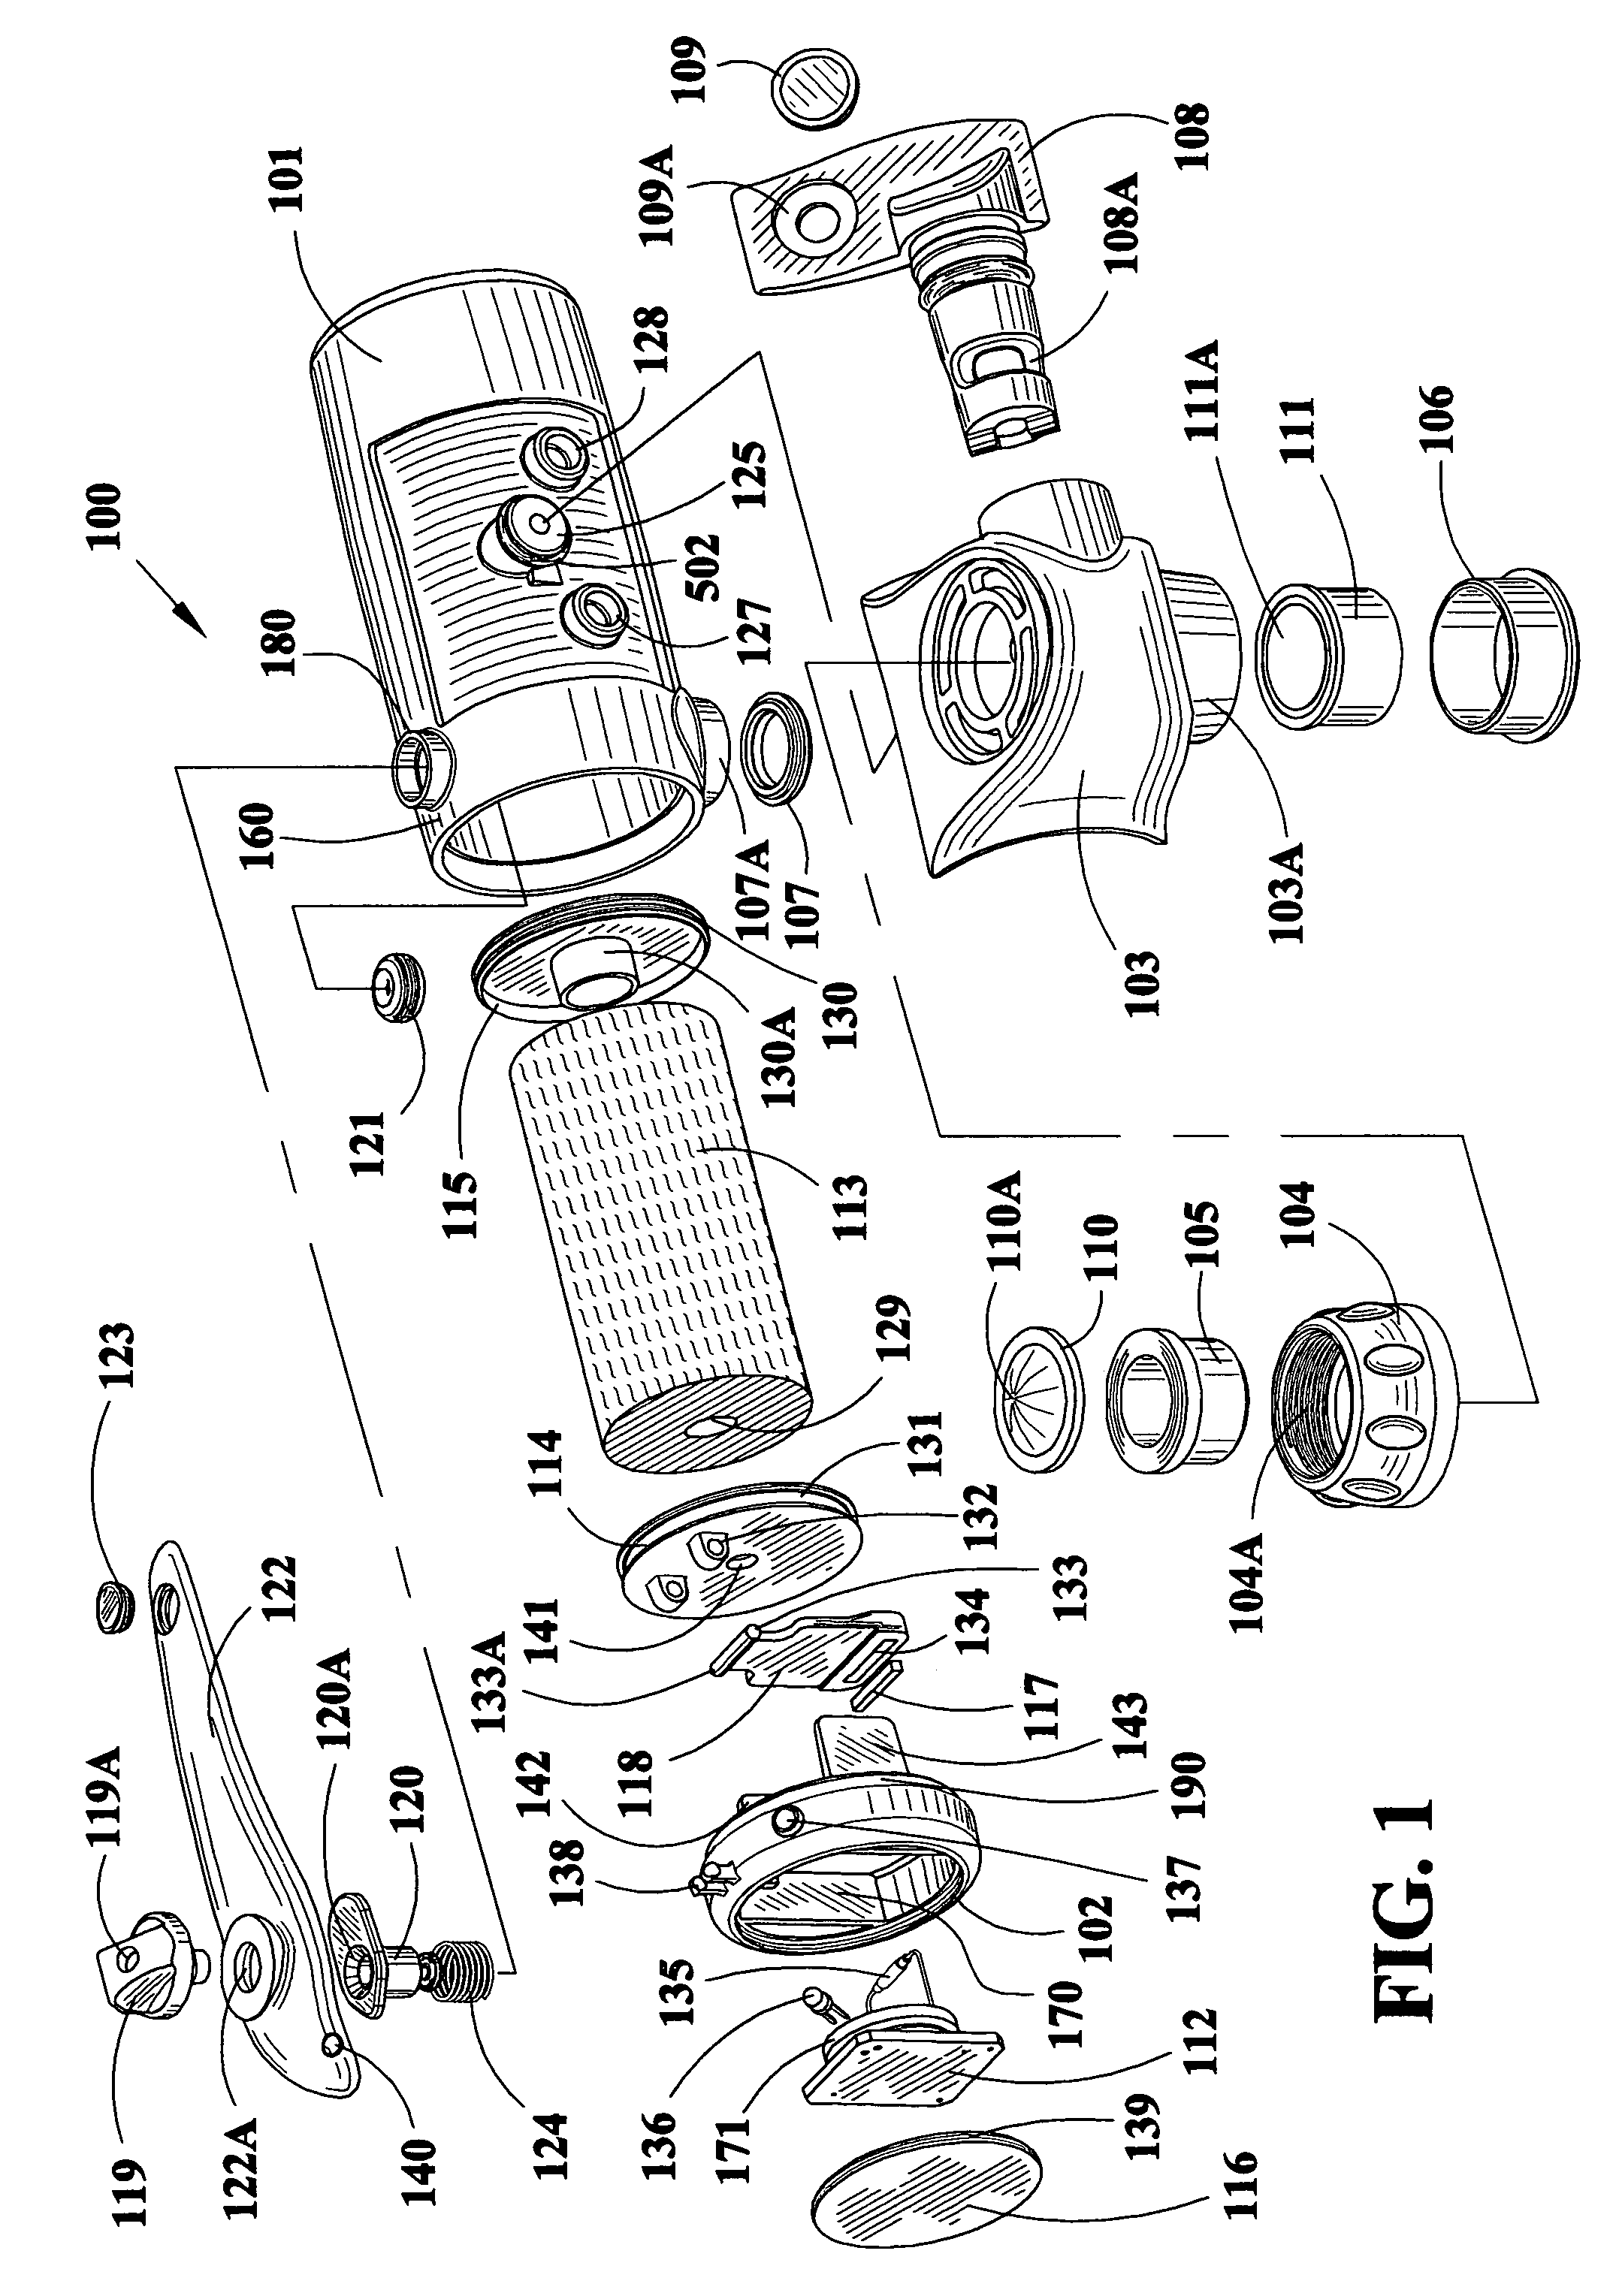 Faucet-mounted water filtration device including gate position sensor